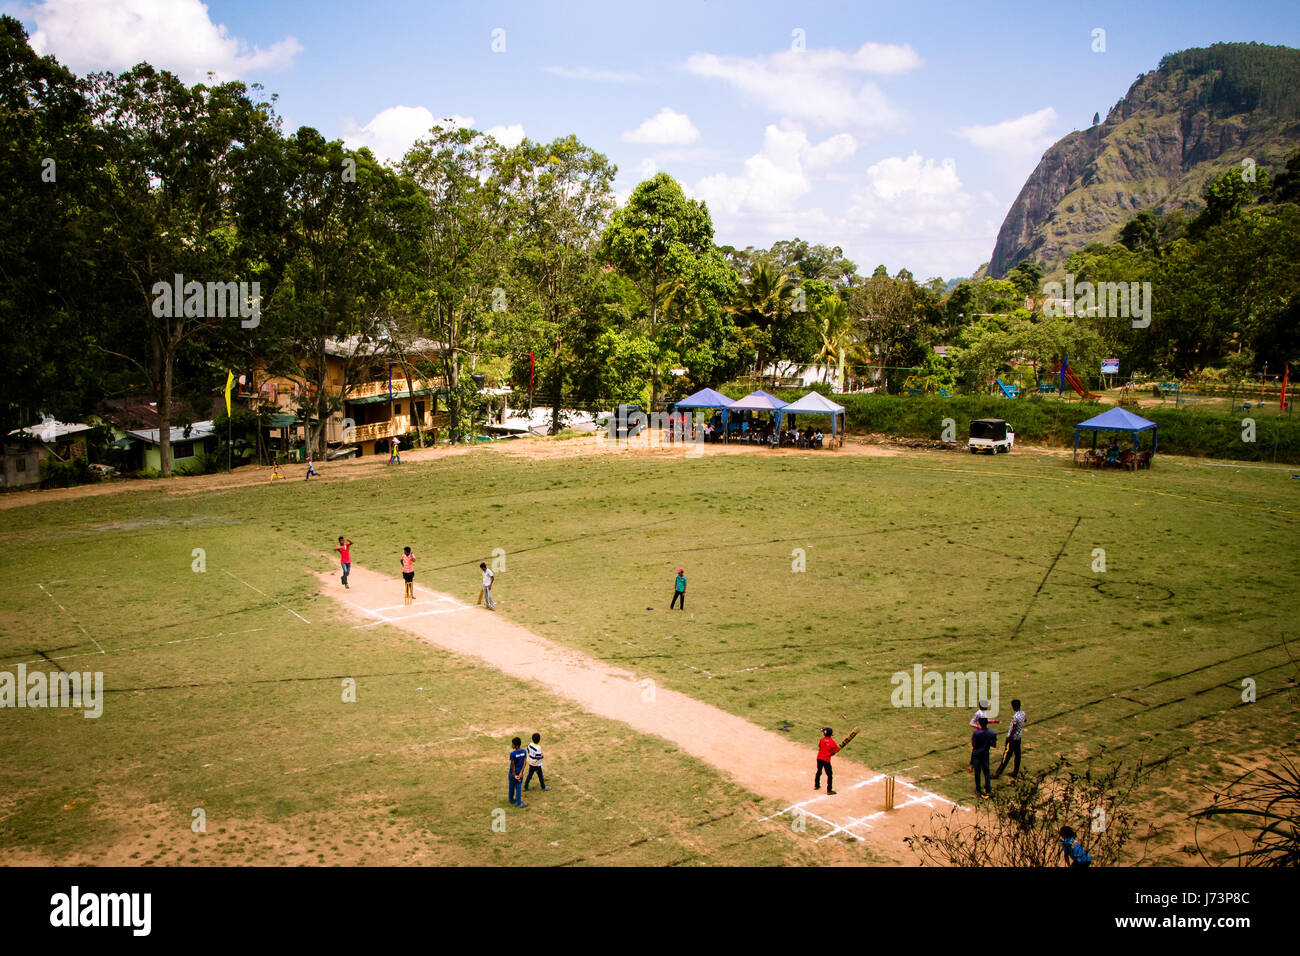 Children play cricket at the local grounds in Ella, Sri Lanka. The mountain known as Ella Rock can be seen in the background. Stock Photo